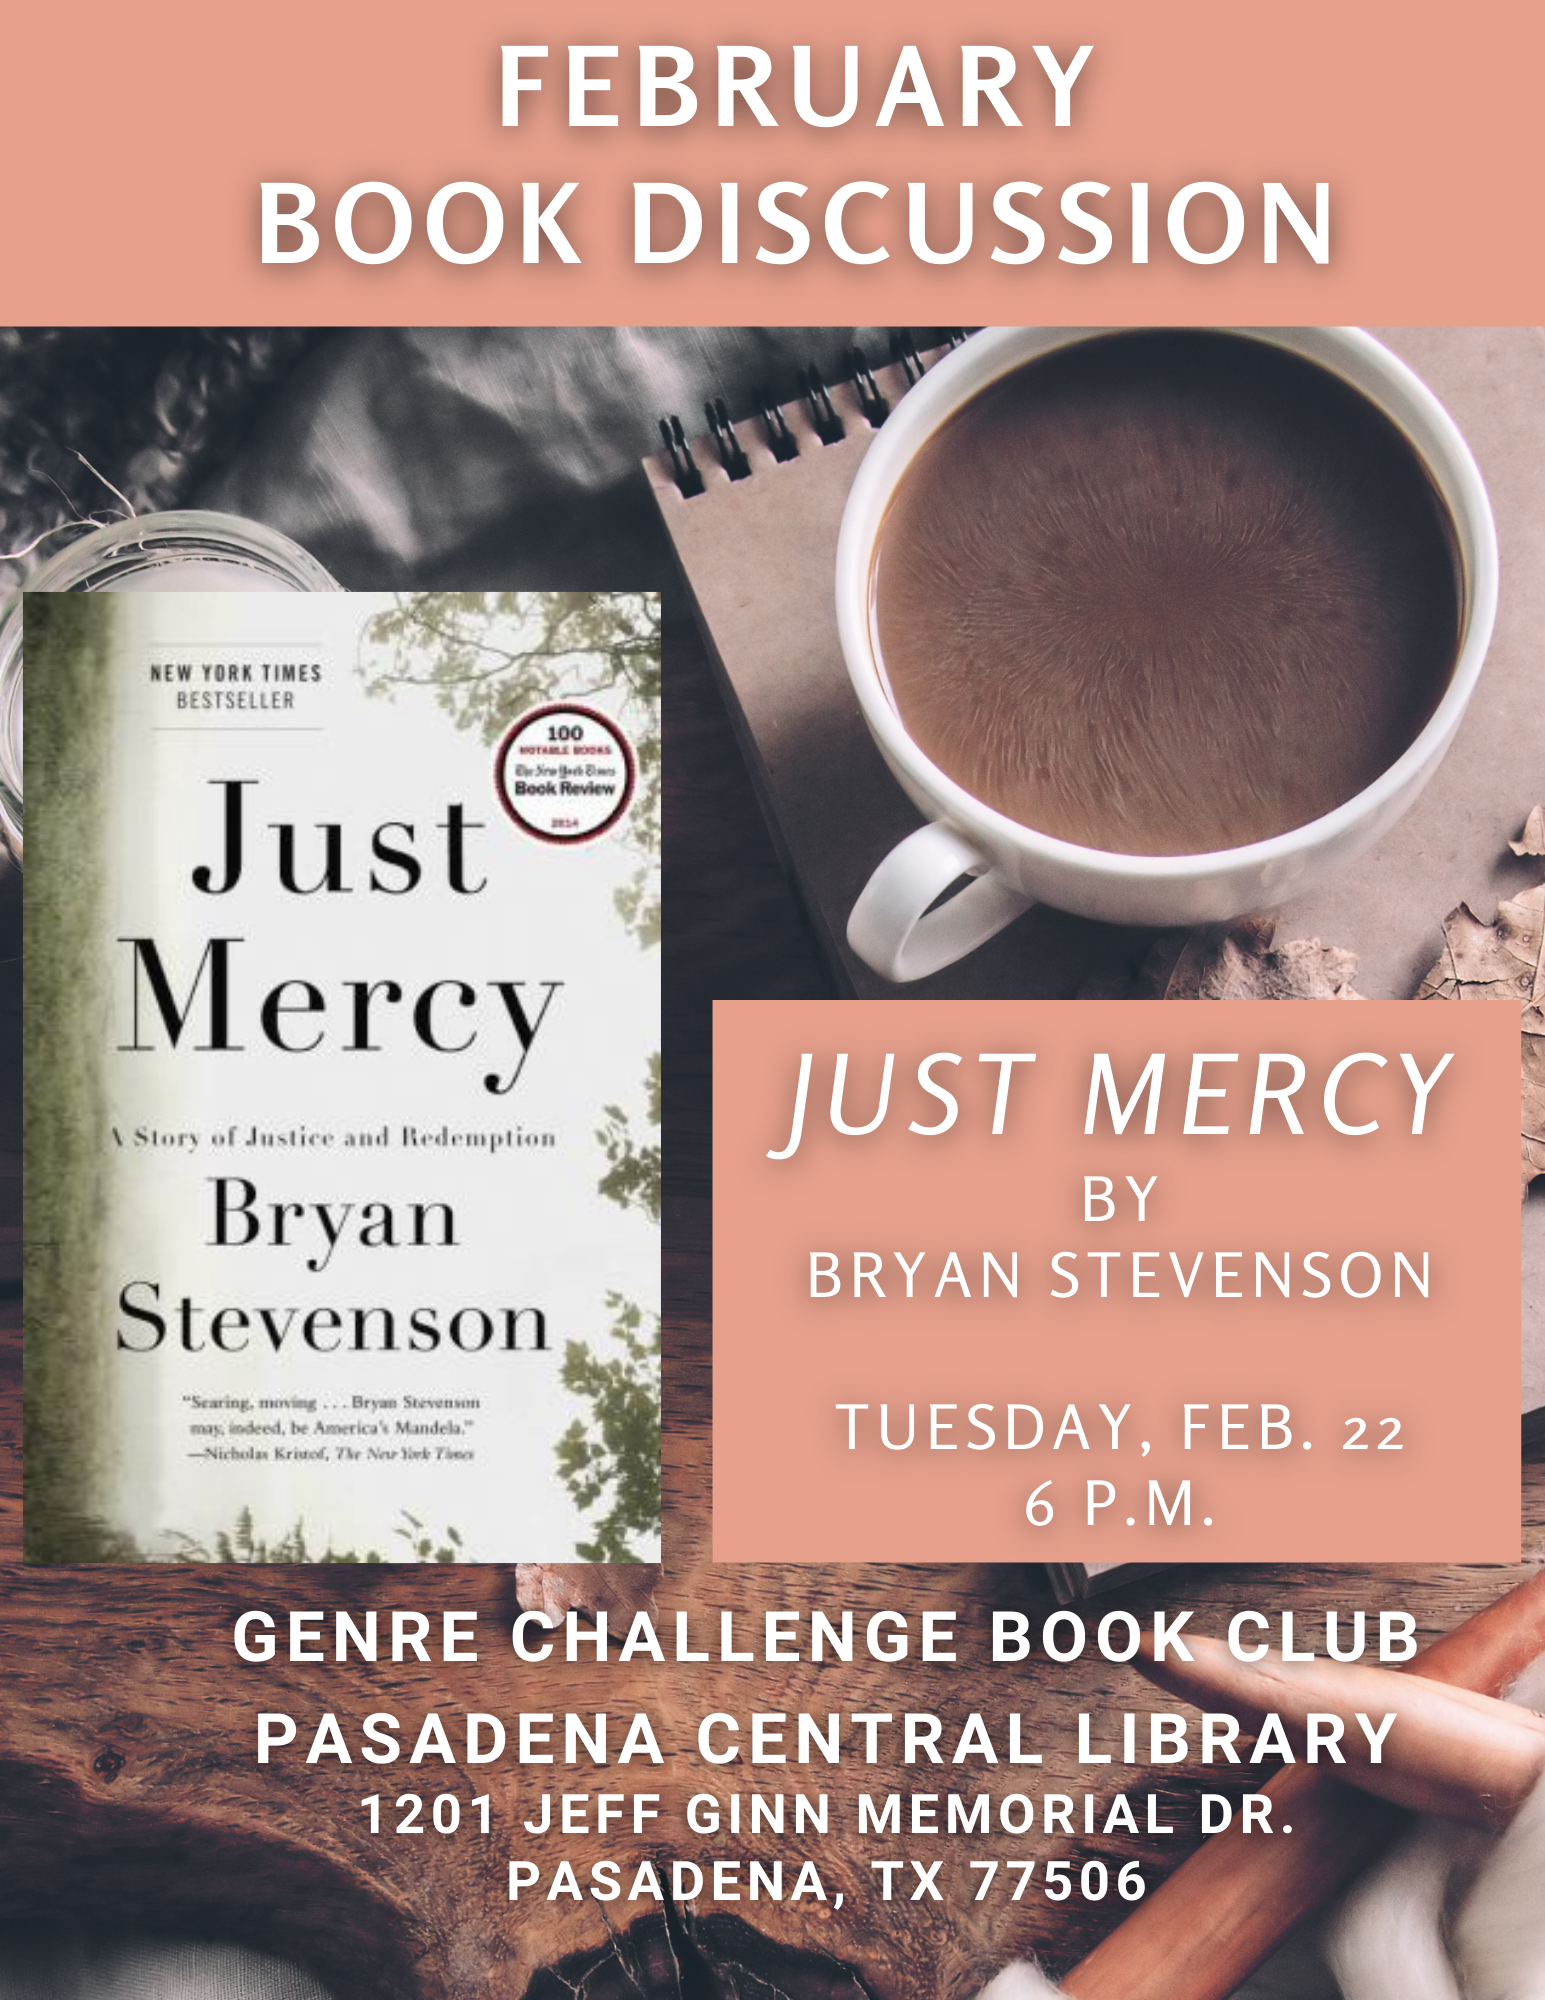 Flyer for book discussion Feb 22